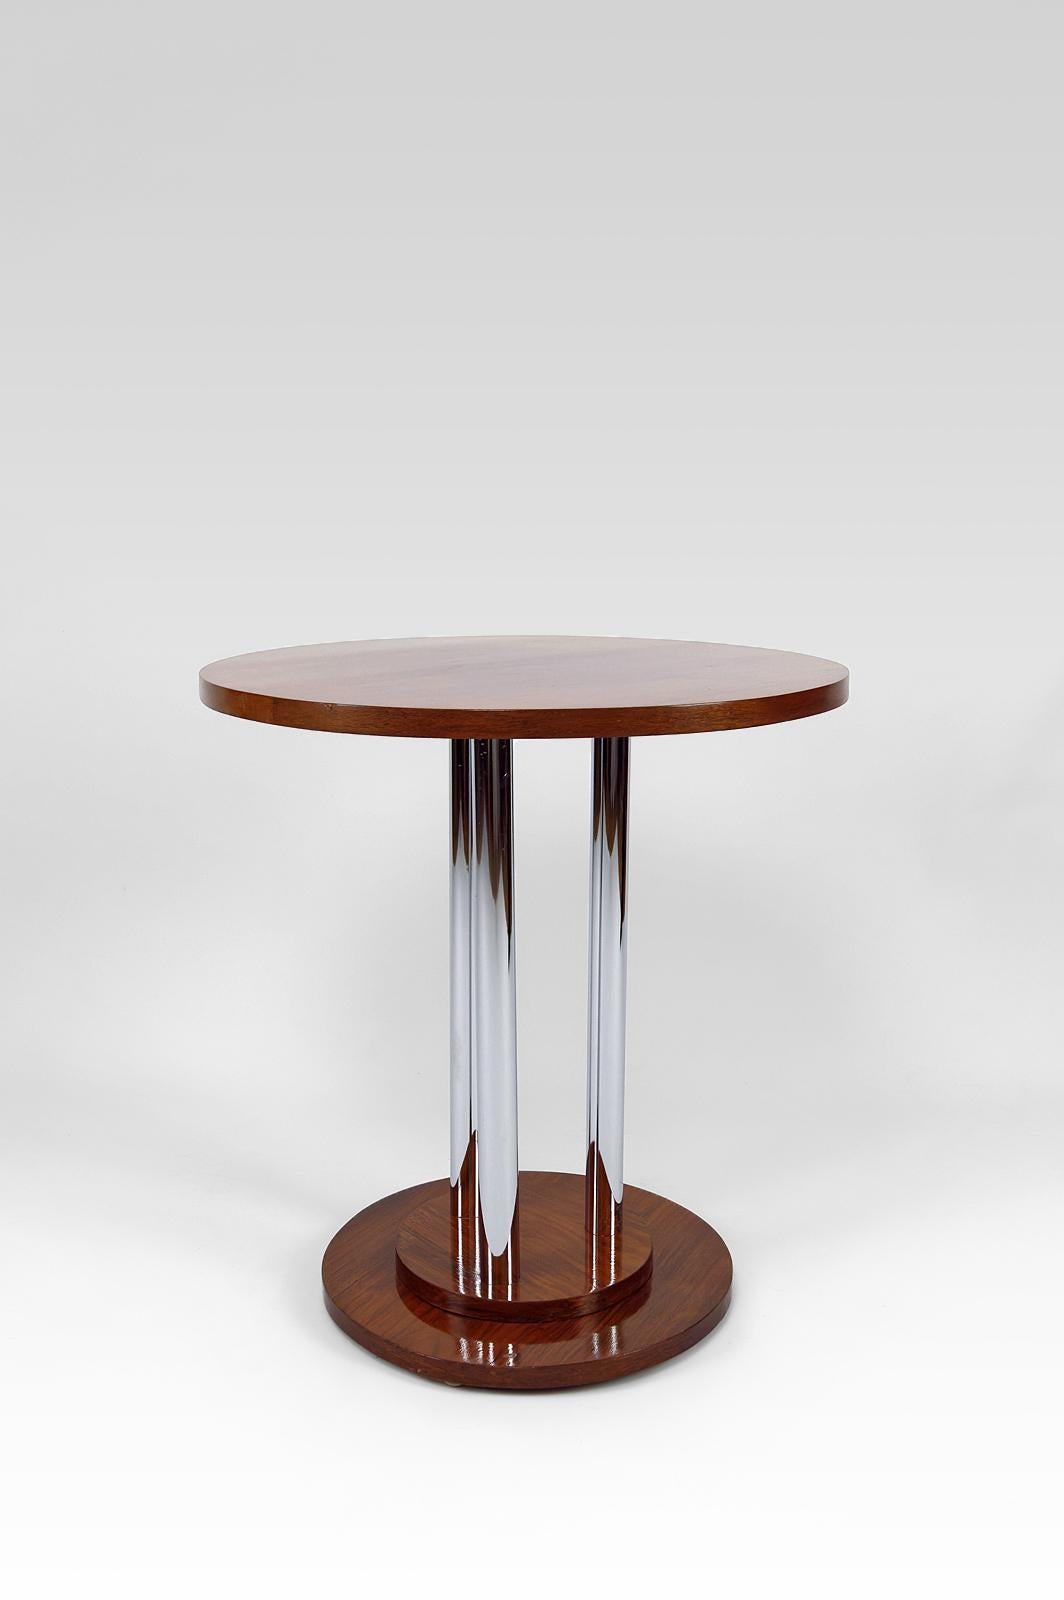 Modernist Art Deco pedestal table in walnut and chrome, France, Circa 1930 For Sale 7